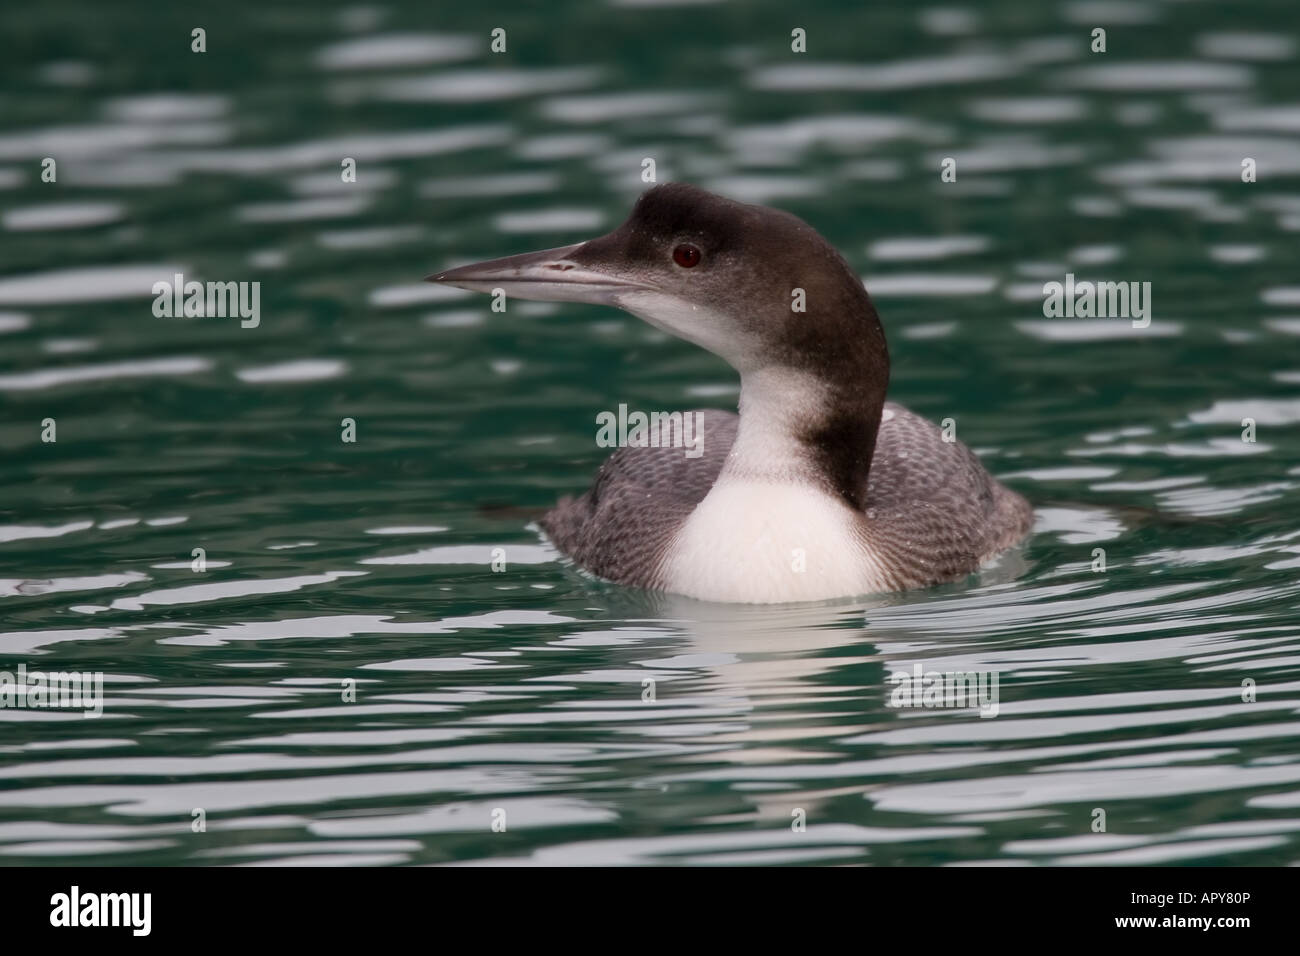 great northern diver, common loon, Gavia immer Stock Photo